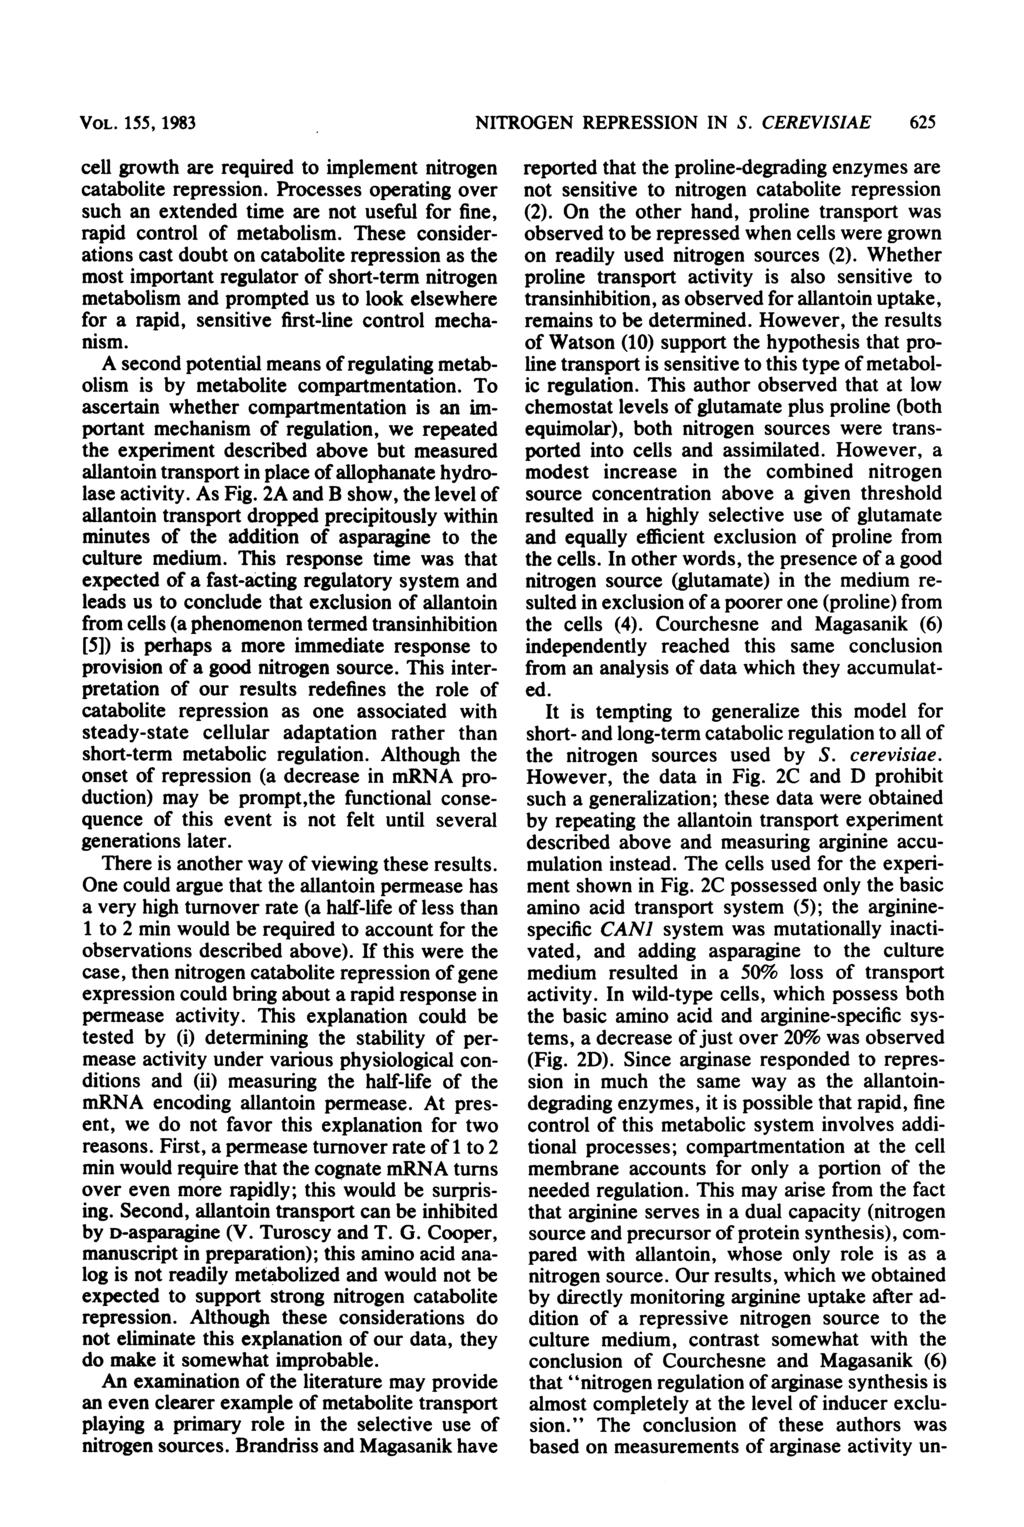 VOL. lss, 1983 cell growth are required to implement nitrogen catabolite repression. Processes operating over such an extended time are not useful for fine, rapid control of metabolism.